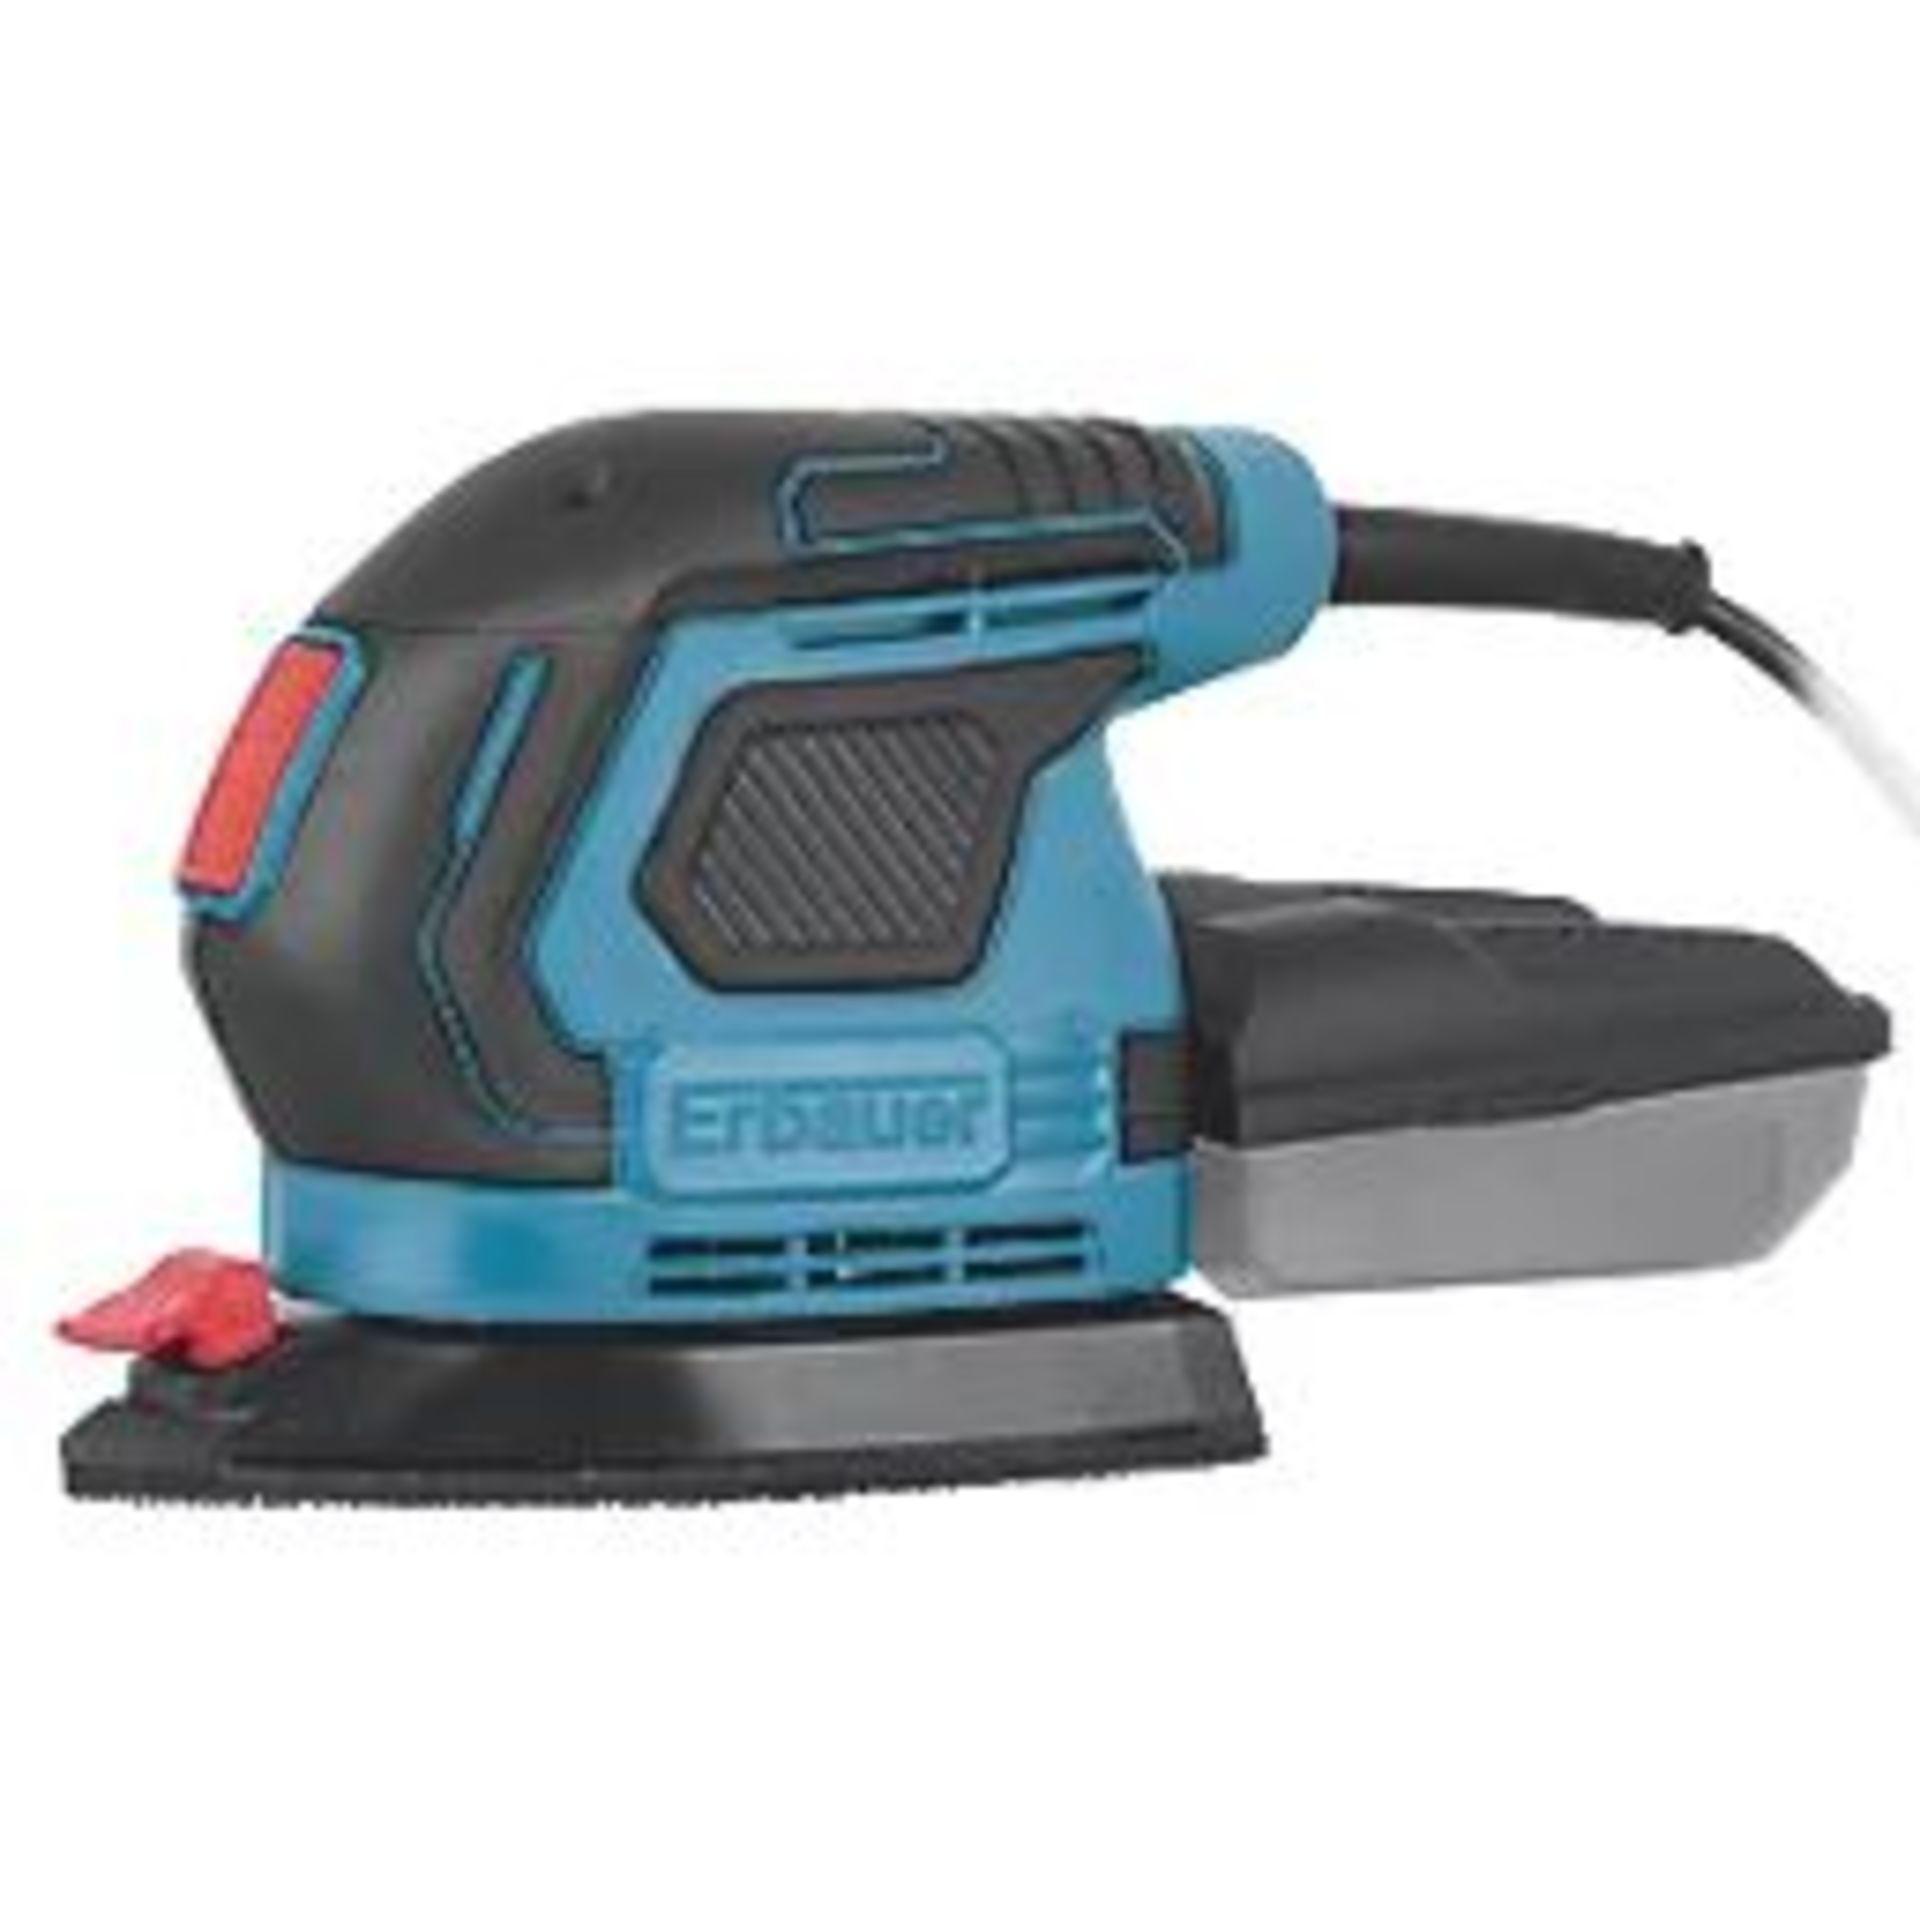 ERBAUER 160W ELECTRIC DETAIL SANDER 220-240V . - R14.15. Ideal for small surfaces and detail